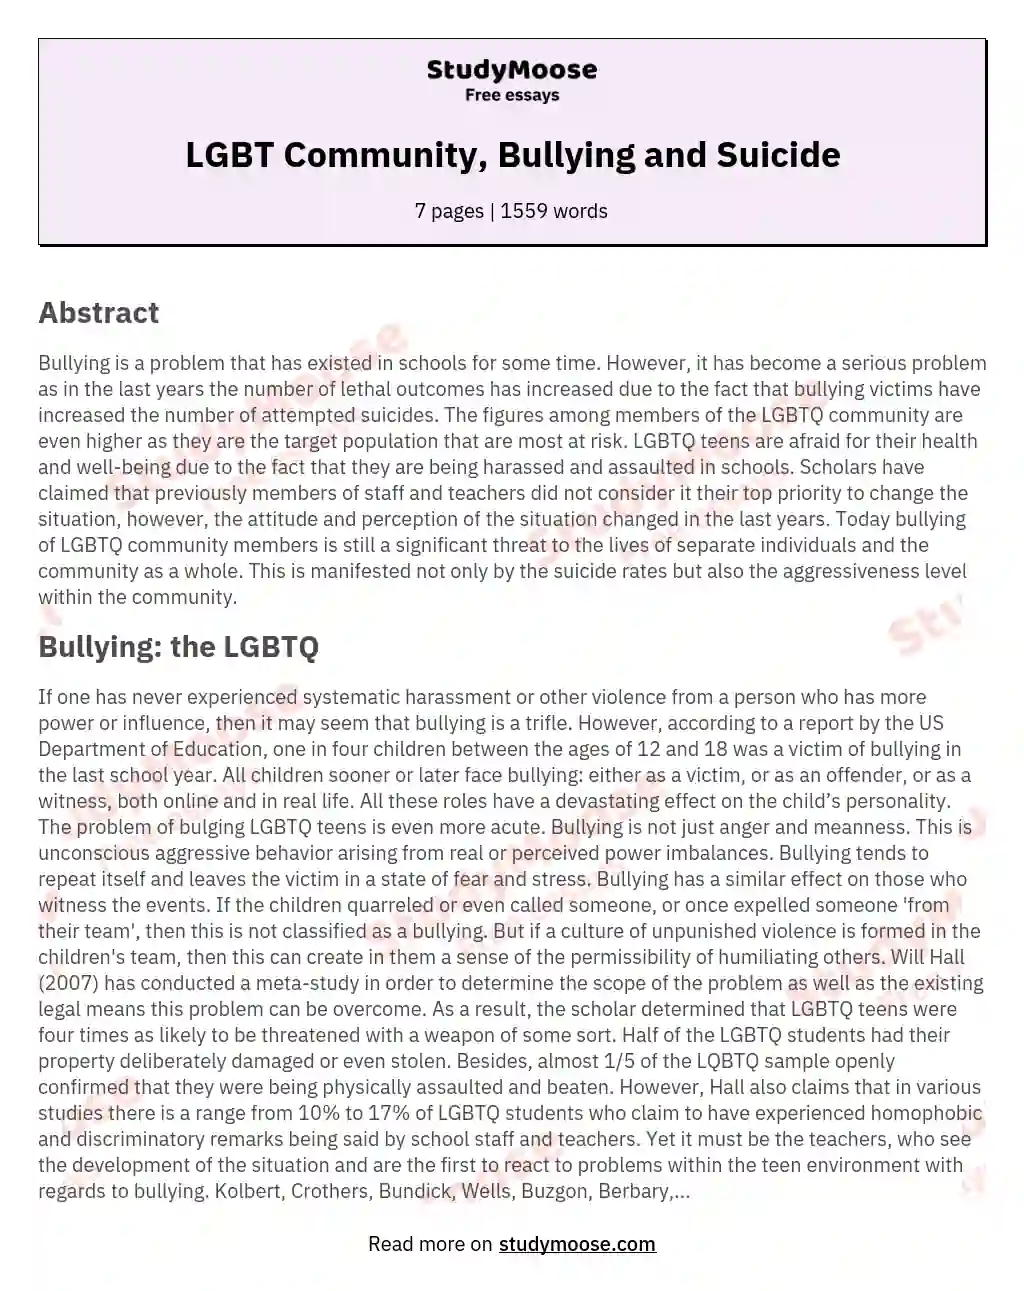 LGBT Community, Bullying and Suicide